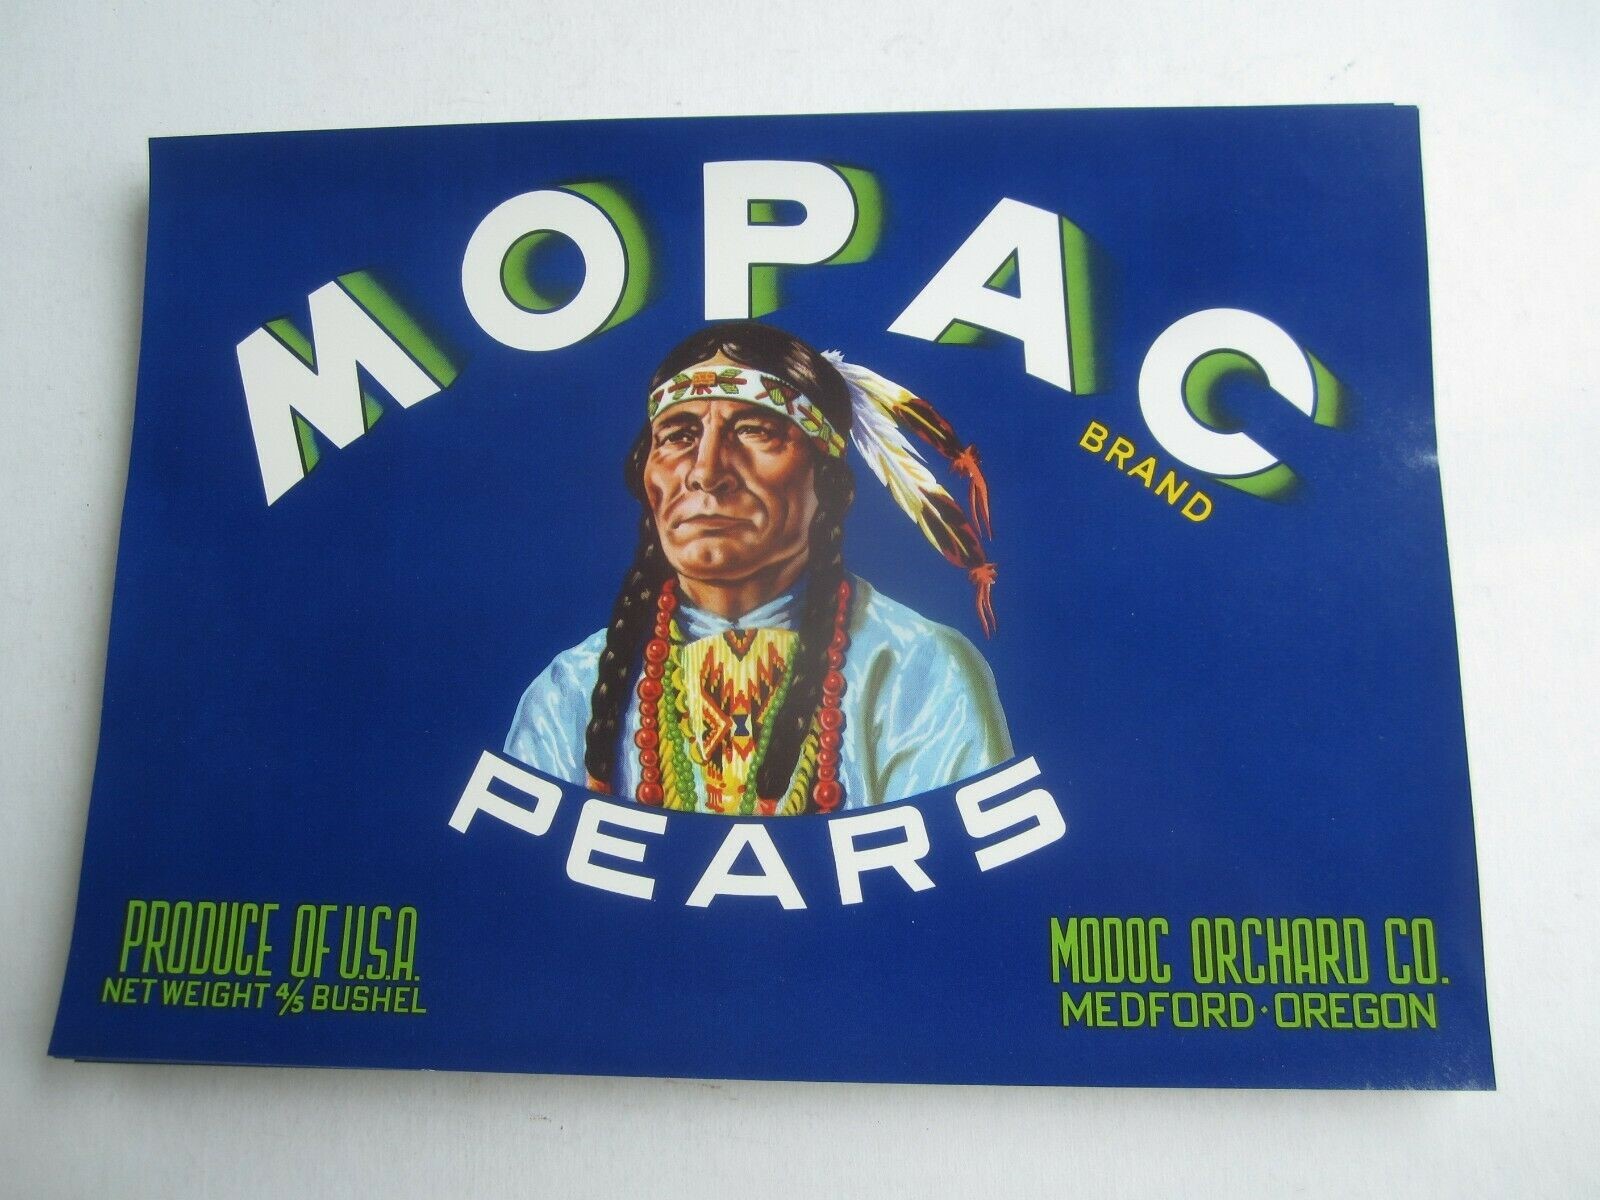  Lot of 100 Old Vintage - Mopac - PEAR LABELS -...